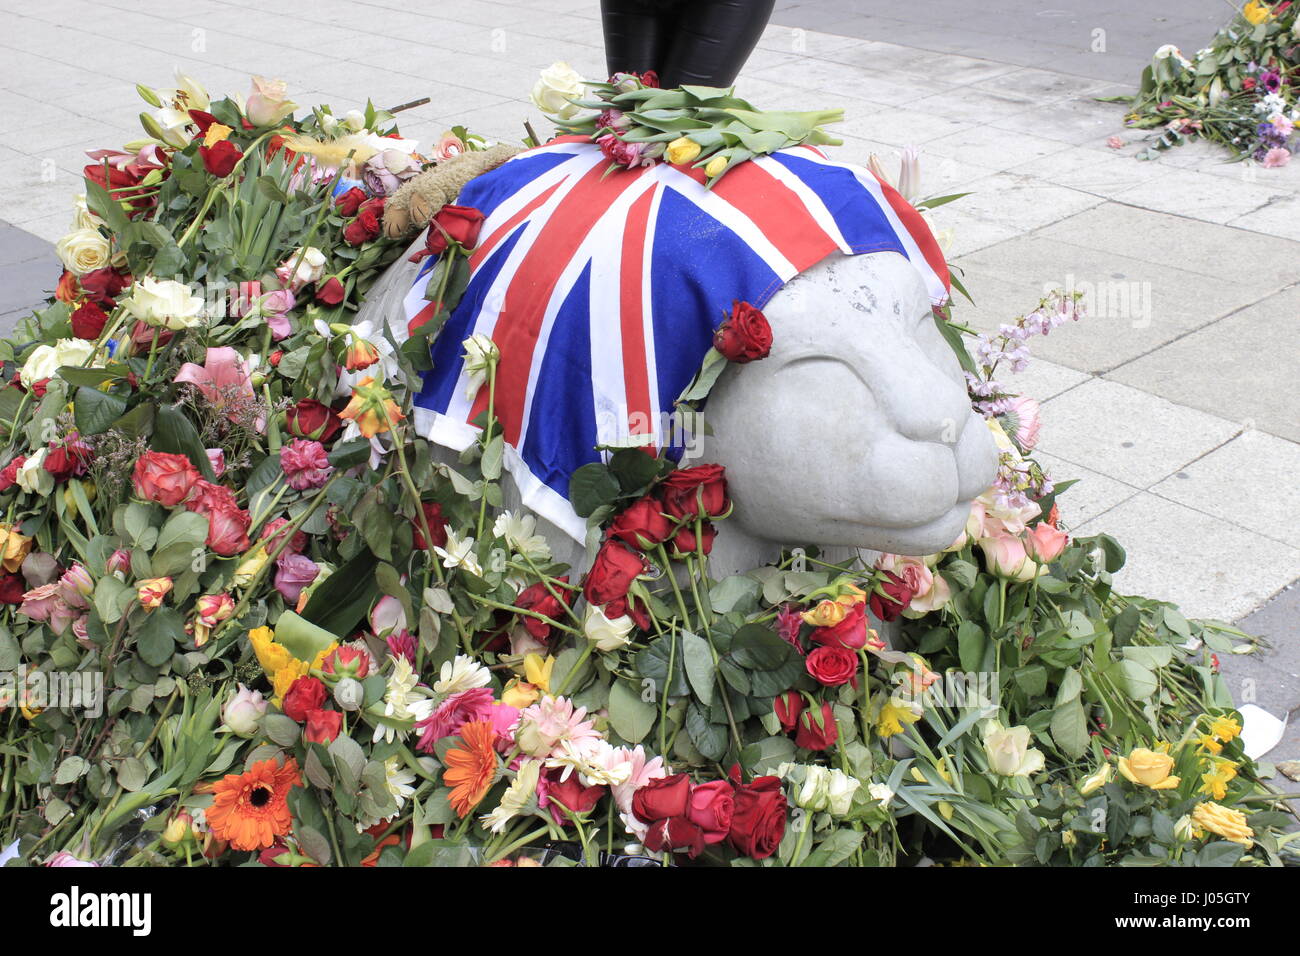 Stockholm, Sweden. 11th April, 2017. Side view of British flag & fresh flower bouquets surrounding the concrete lion's head street barricade,at the corner of 78 Drottninggatan & Kungsgatan streets, in remembrance of the British citizen Chris Bevington. another casualty of the Stockholm's terrorist truck attacker. Stockolm city, Sweden. Credit: BasilT/Alamy Live News Stock Photo